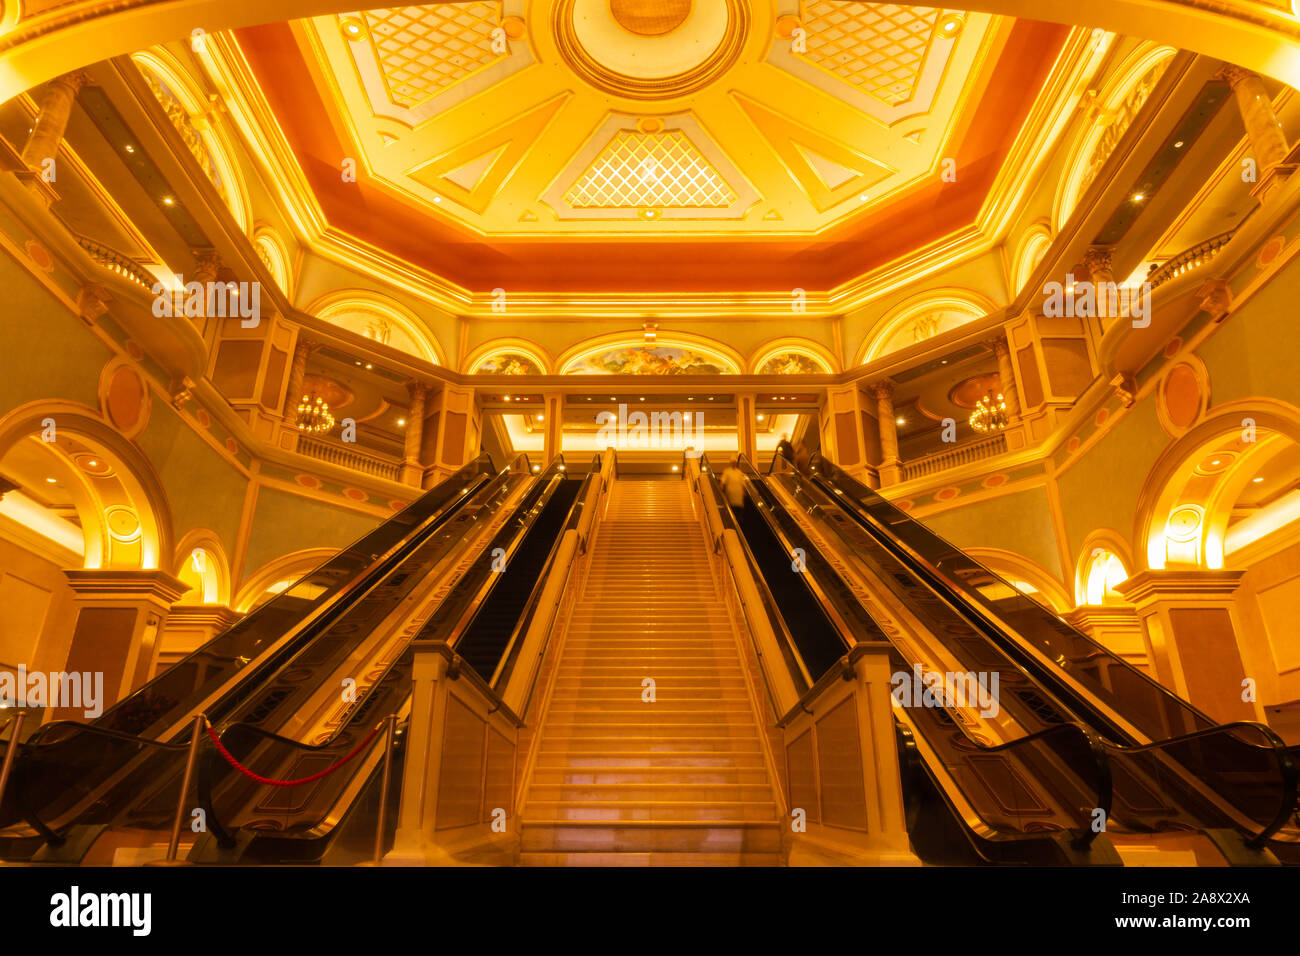 October 31, 2019: MACAU, CHINA - Interior of the Venetian Hotel and Casino, Largest Supercomplex in the World Stock Photo